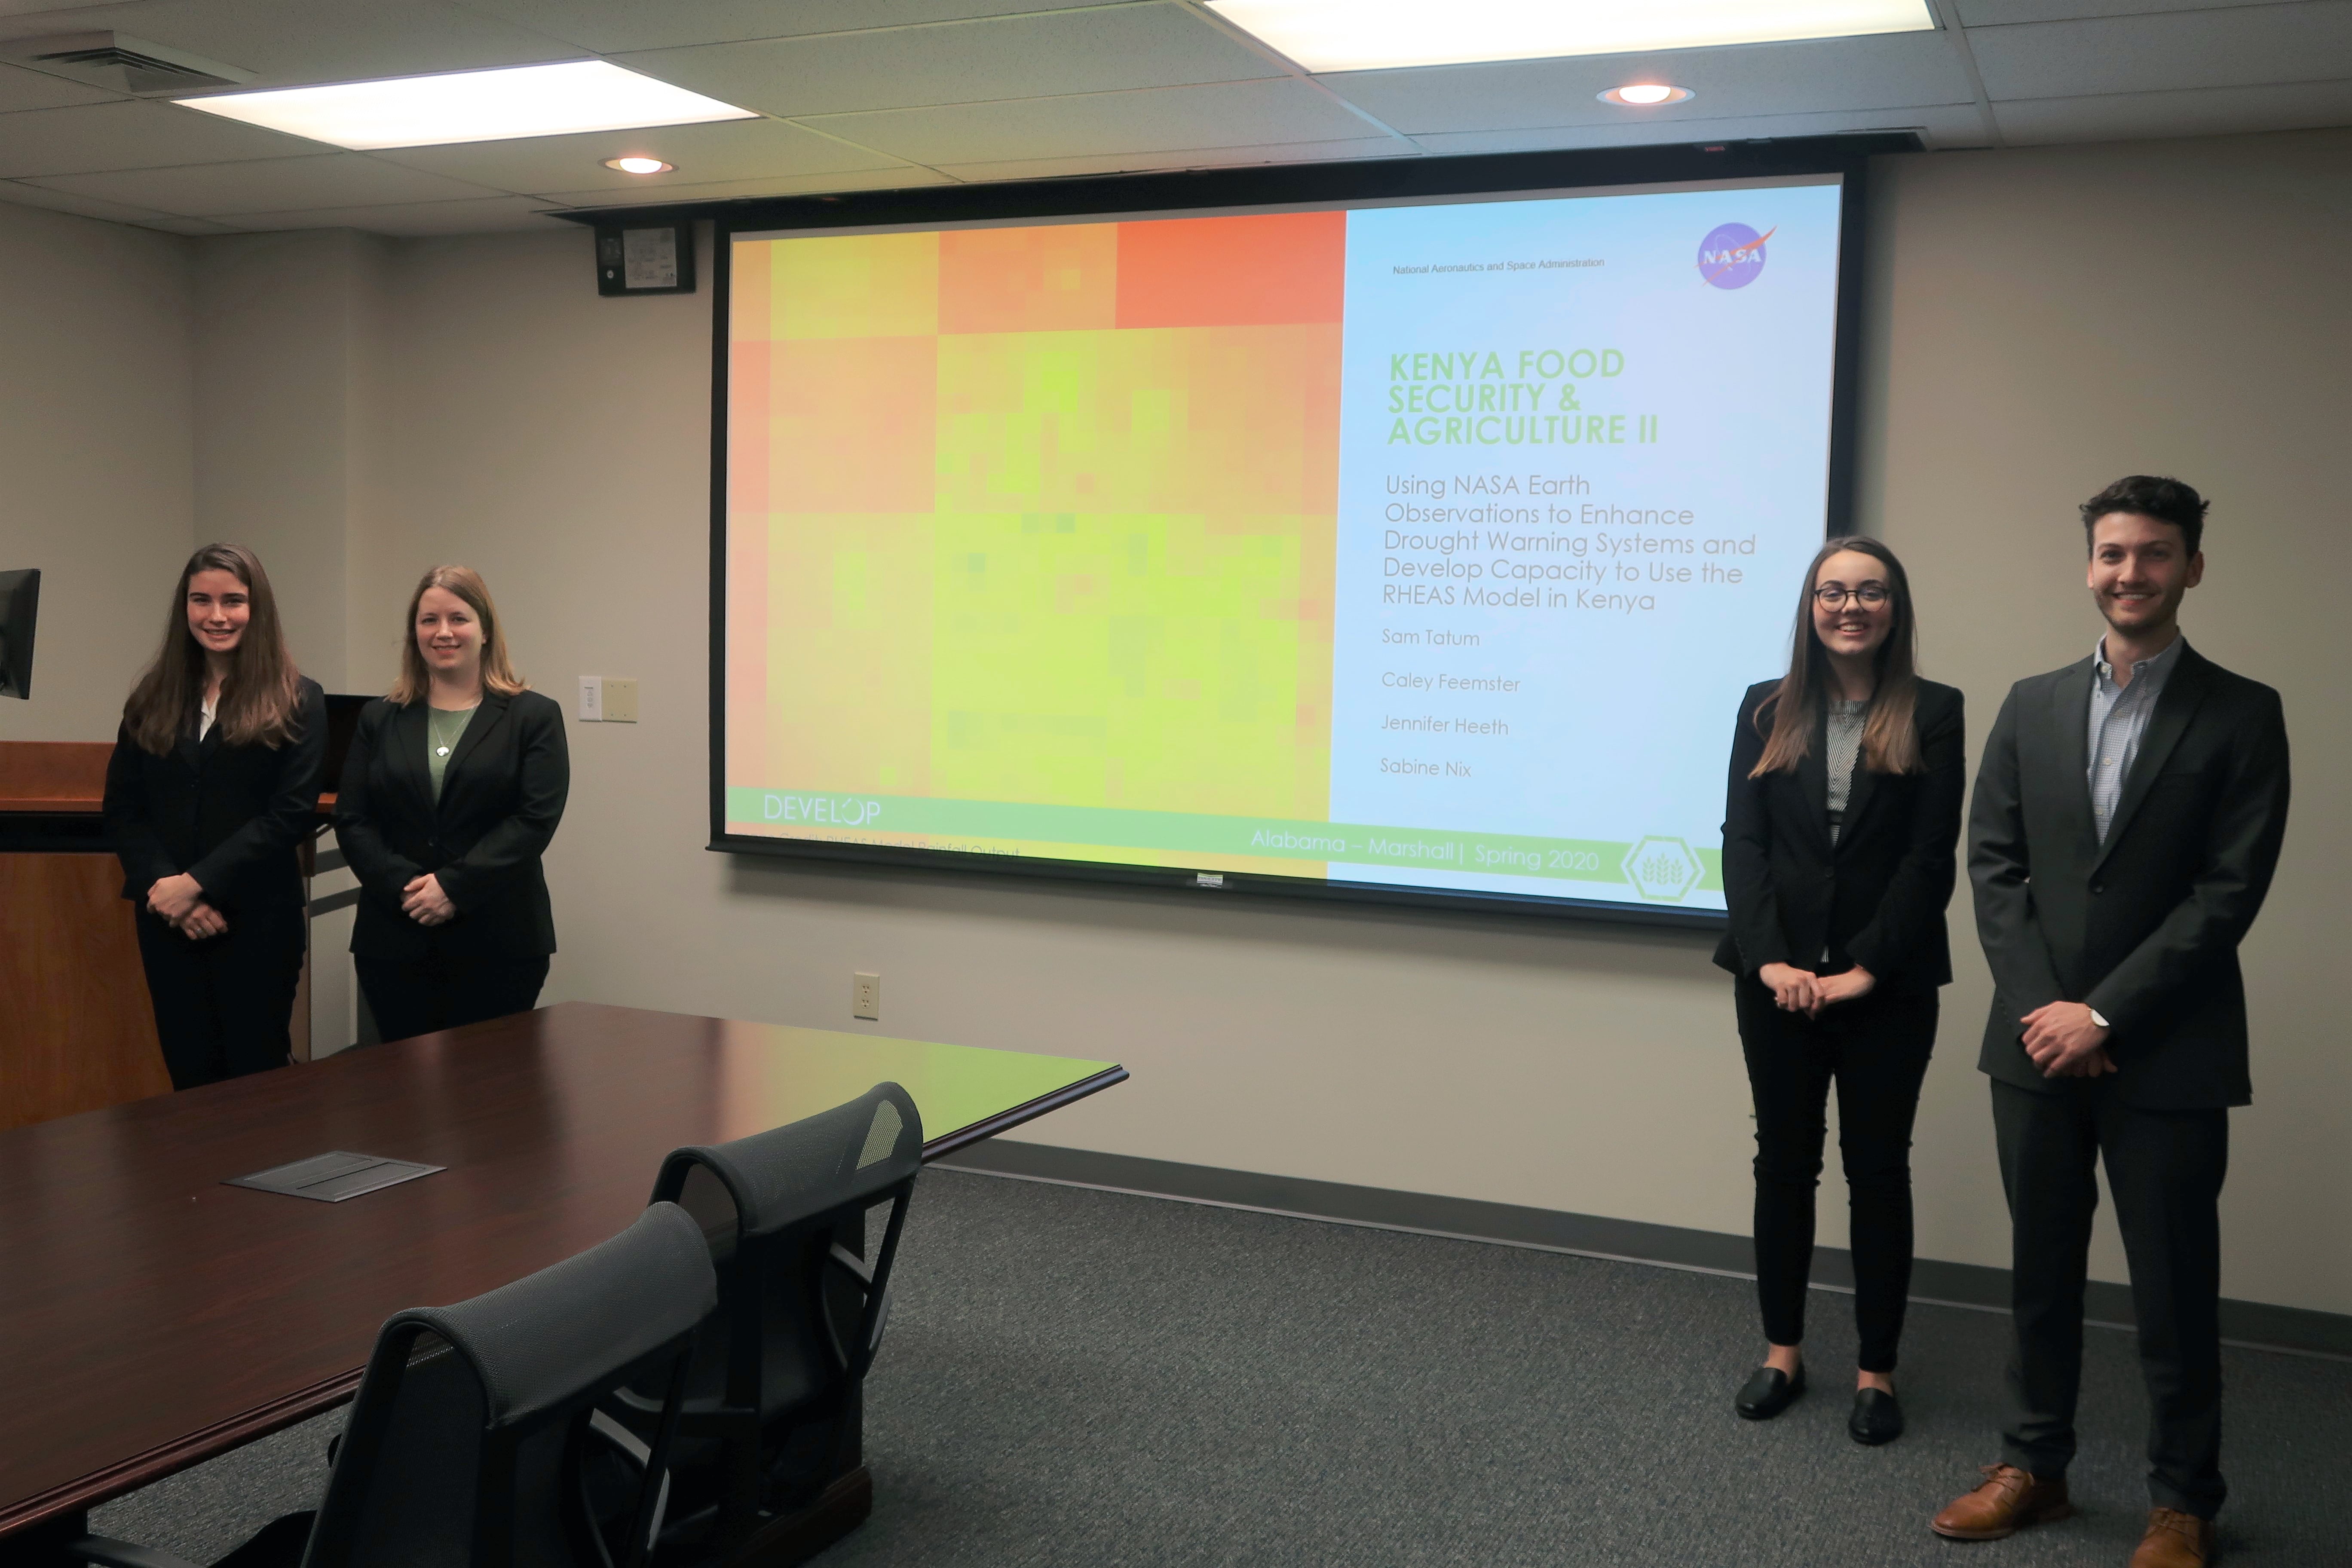 DEVELOP participants during an end-of-term presentation. Left to right: Sabine Nix, Jennifer Heeth, Caley Feemster, and Samuel Tatum. Image credit: Amiya Kalra